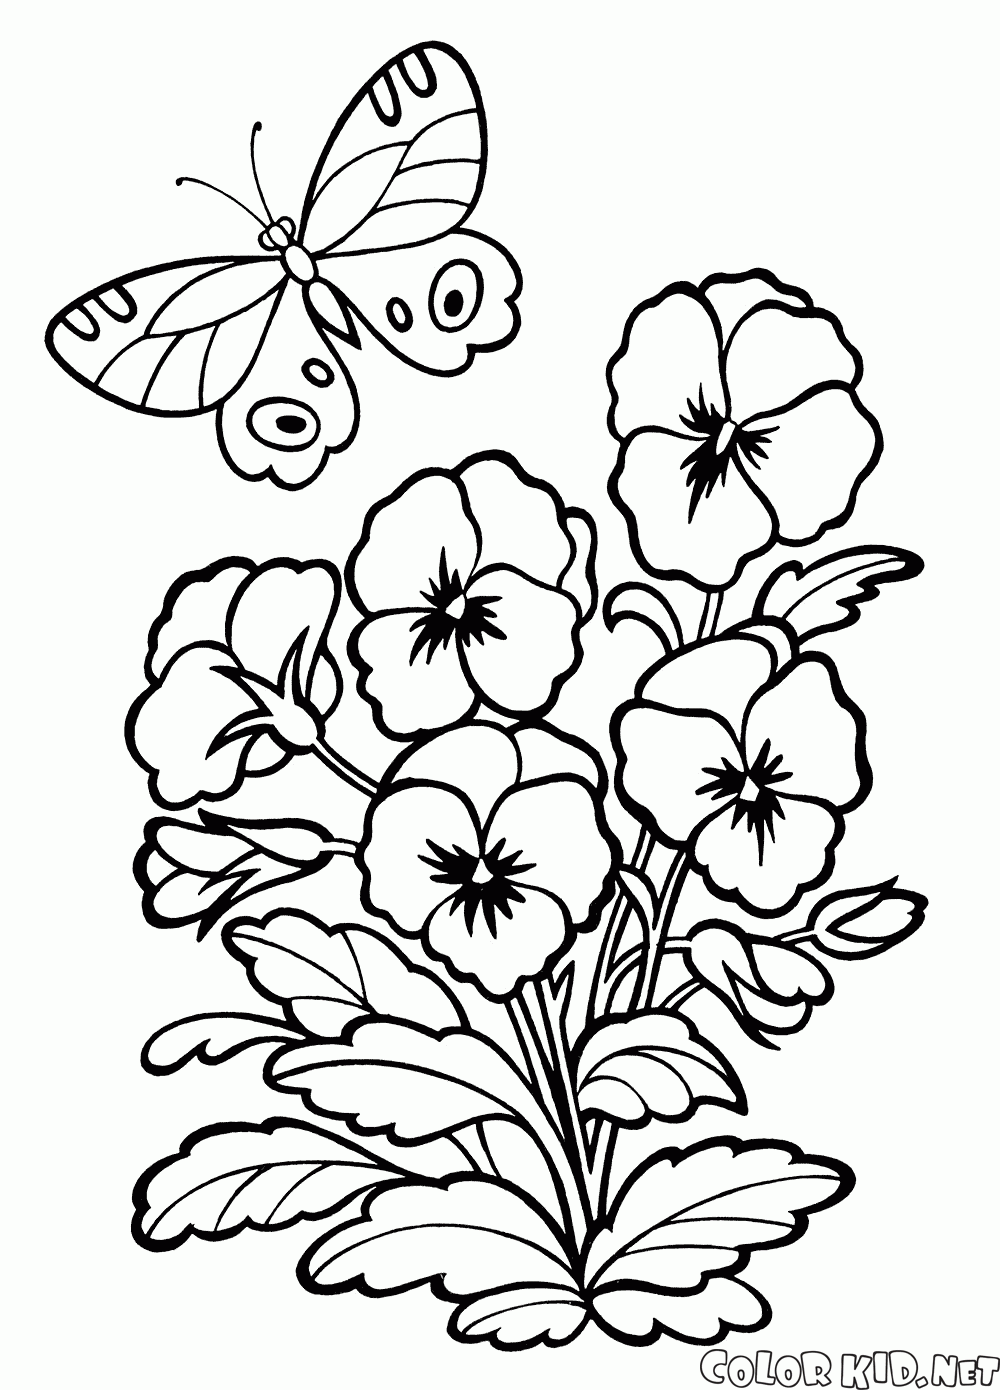 Pansy coloring #18, Download drawings